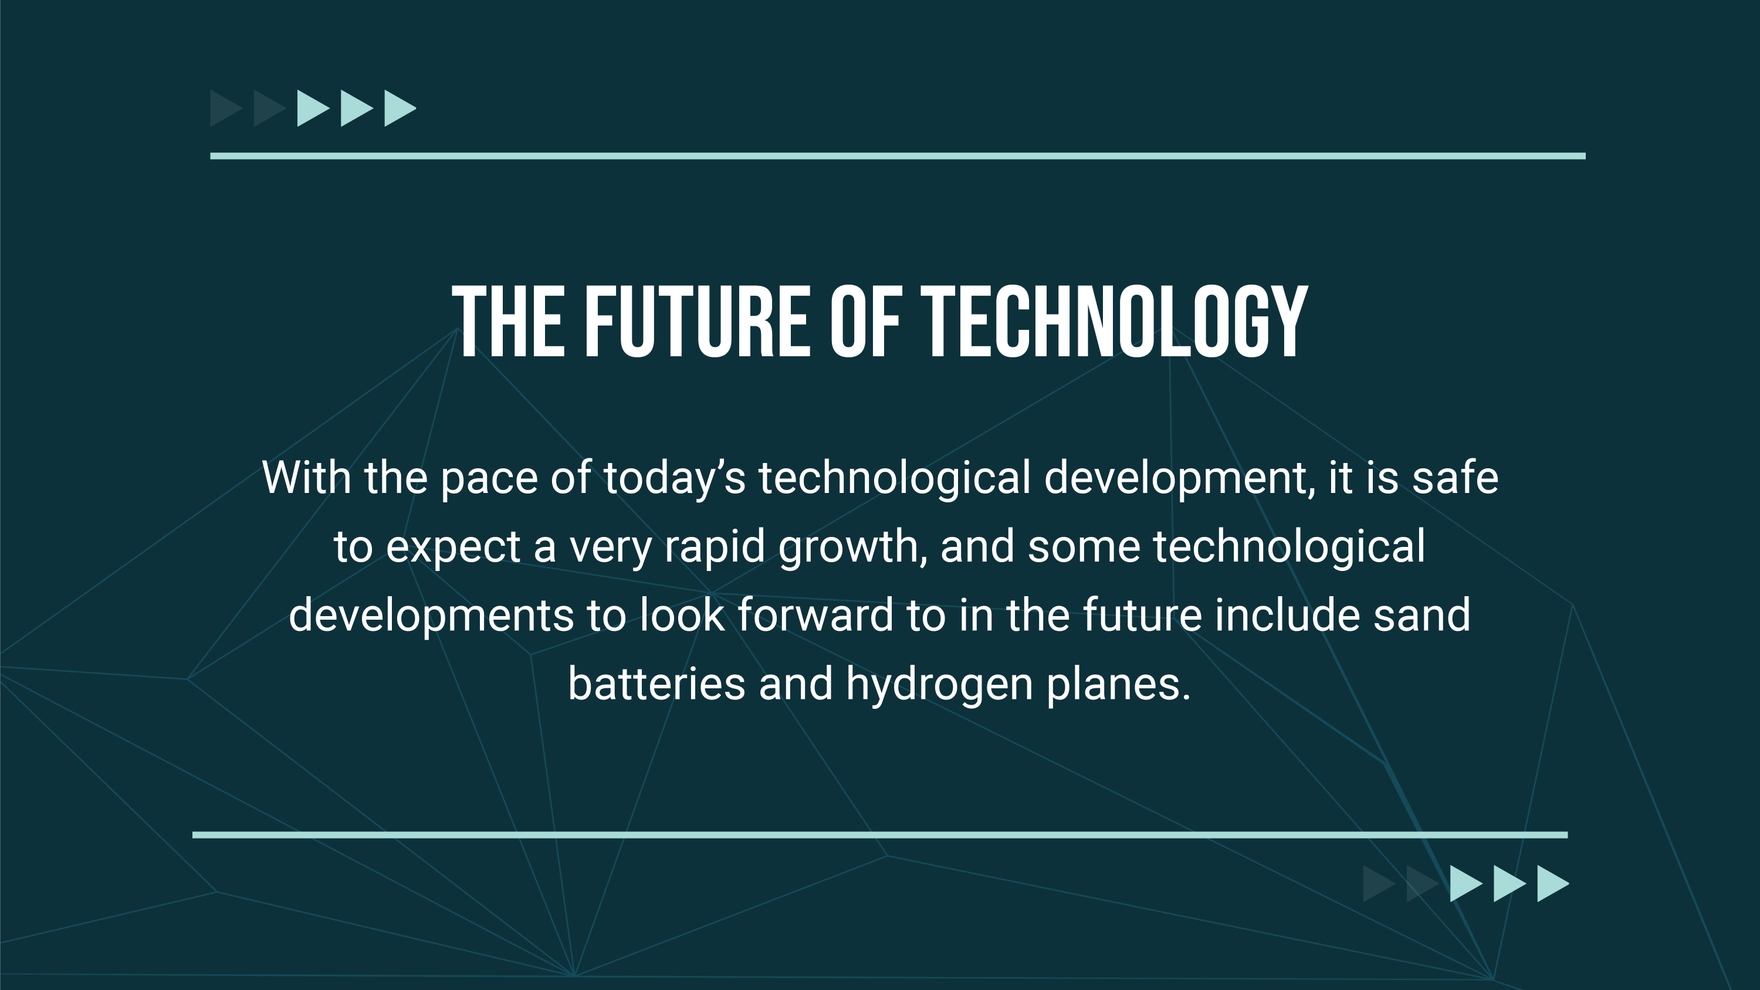 Technology  Infographic Presentation Template